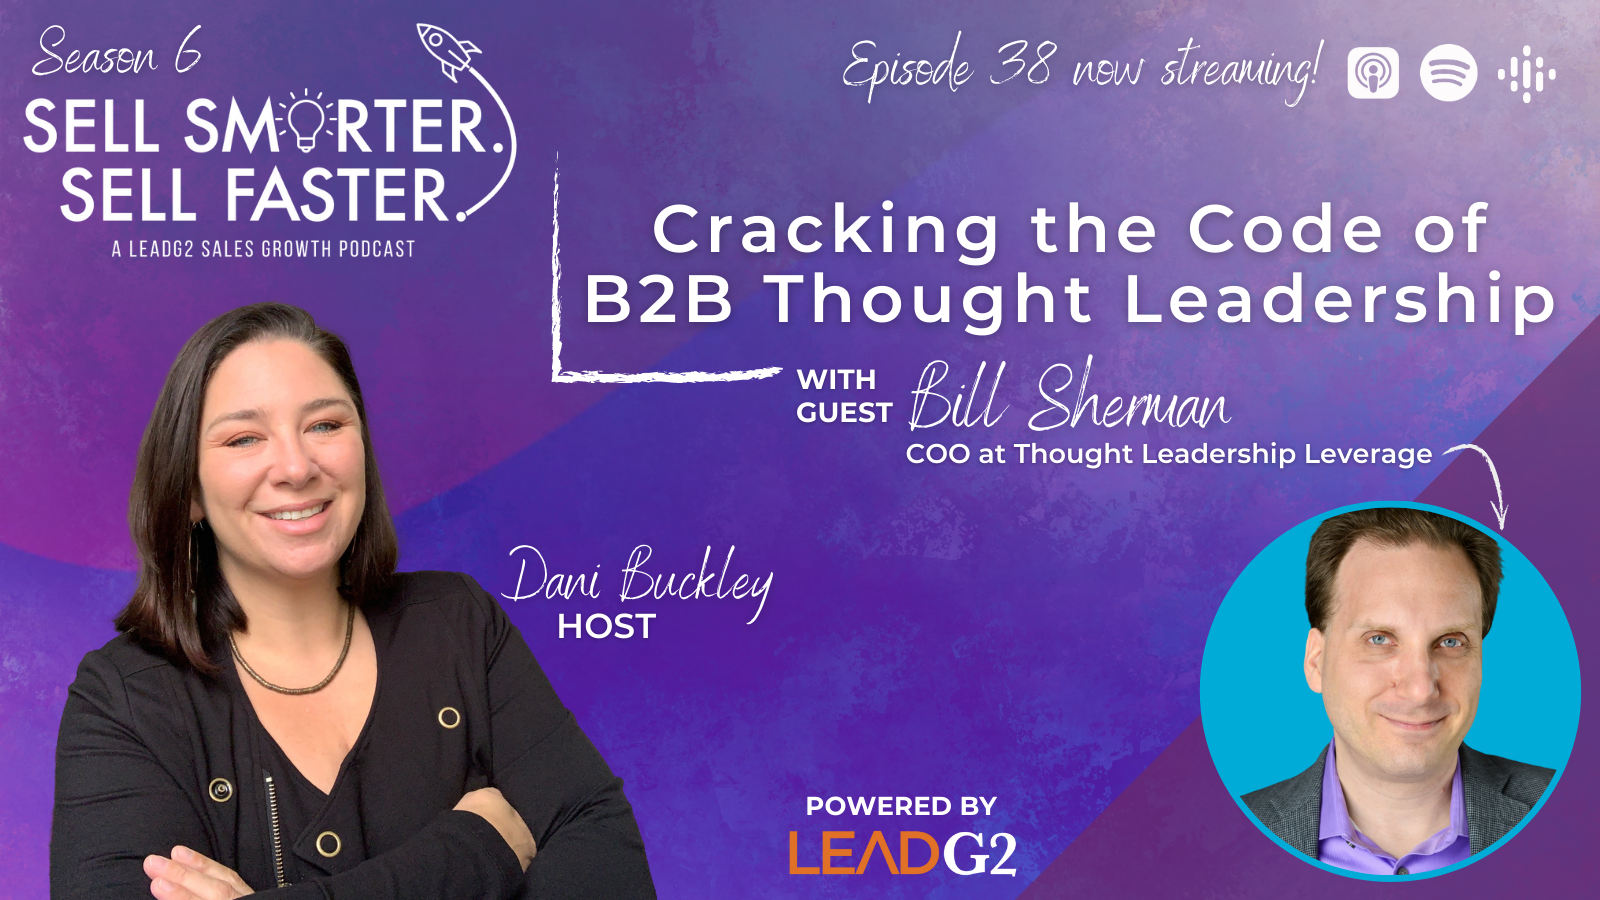 Cracking the Code of B2B Thought Leadership with Bill Sherman